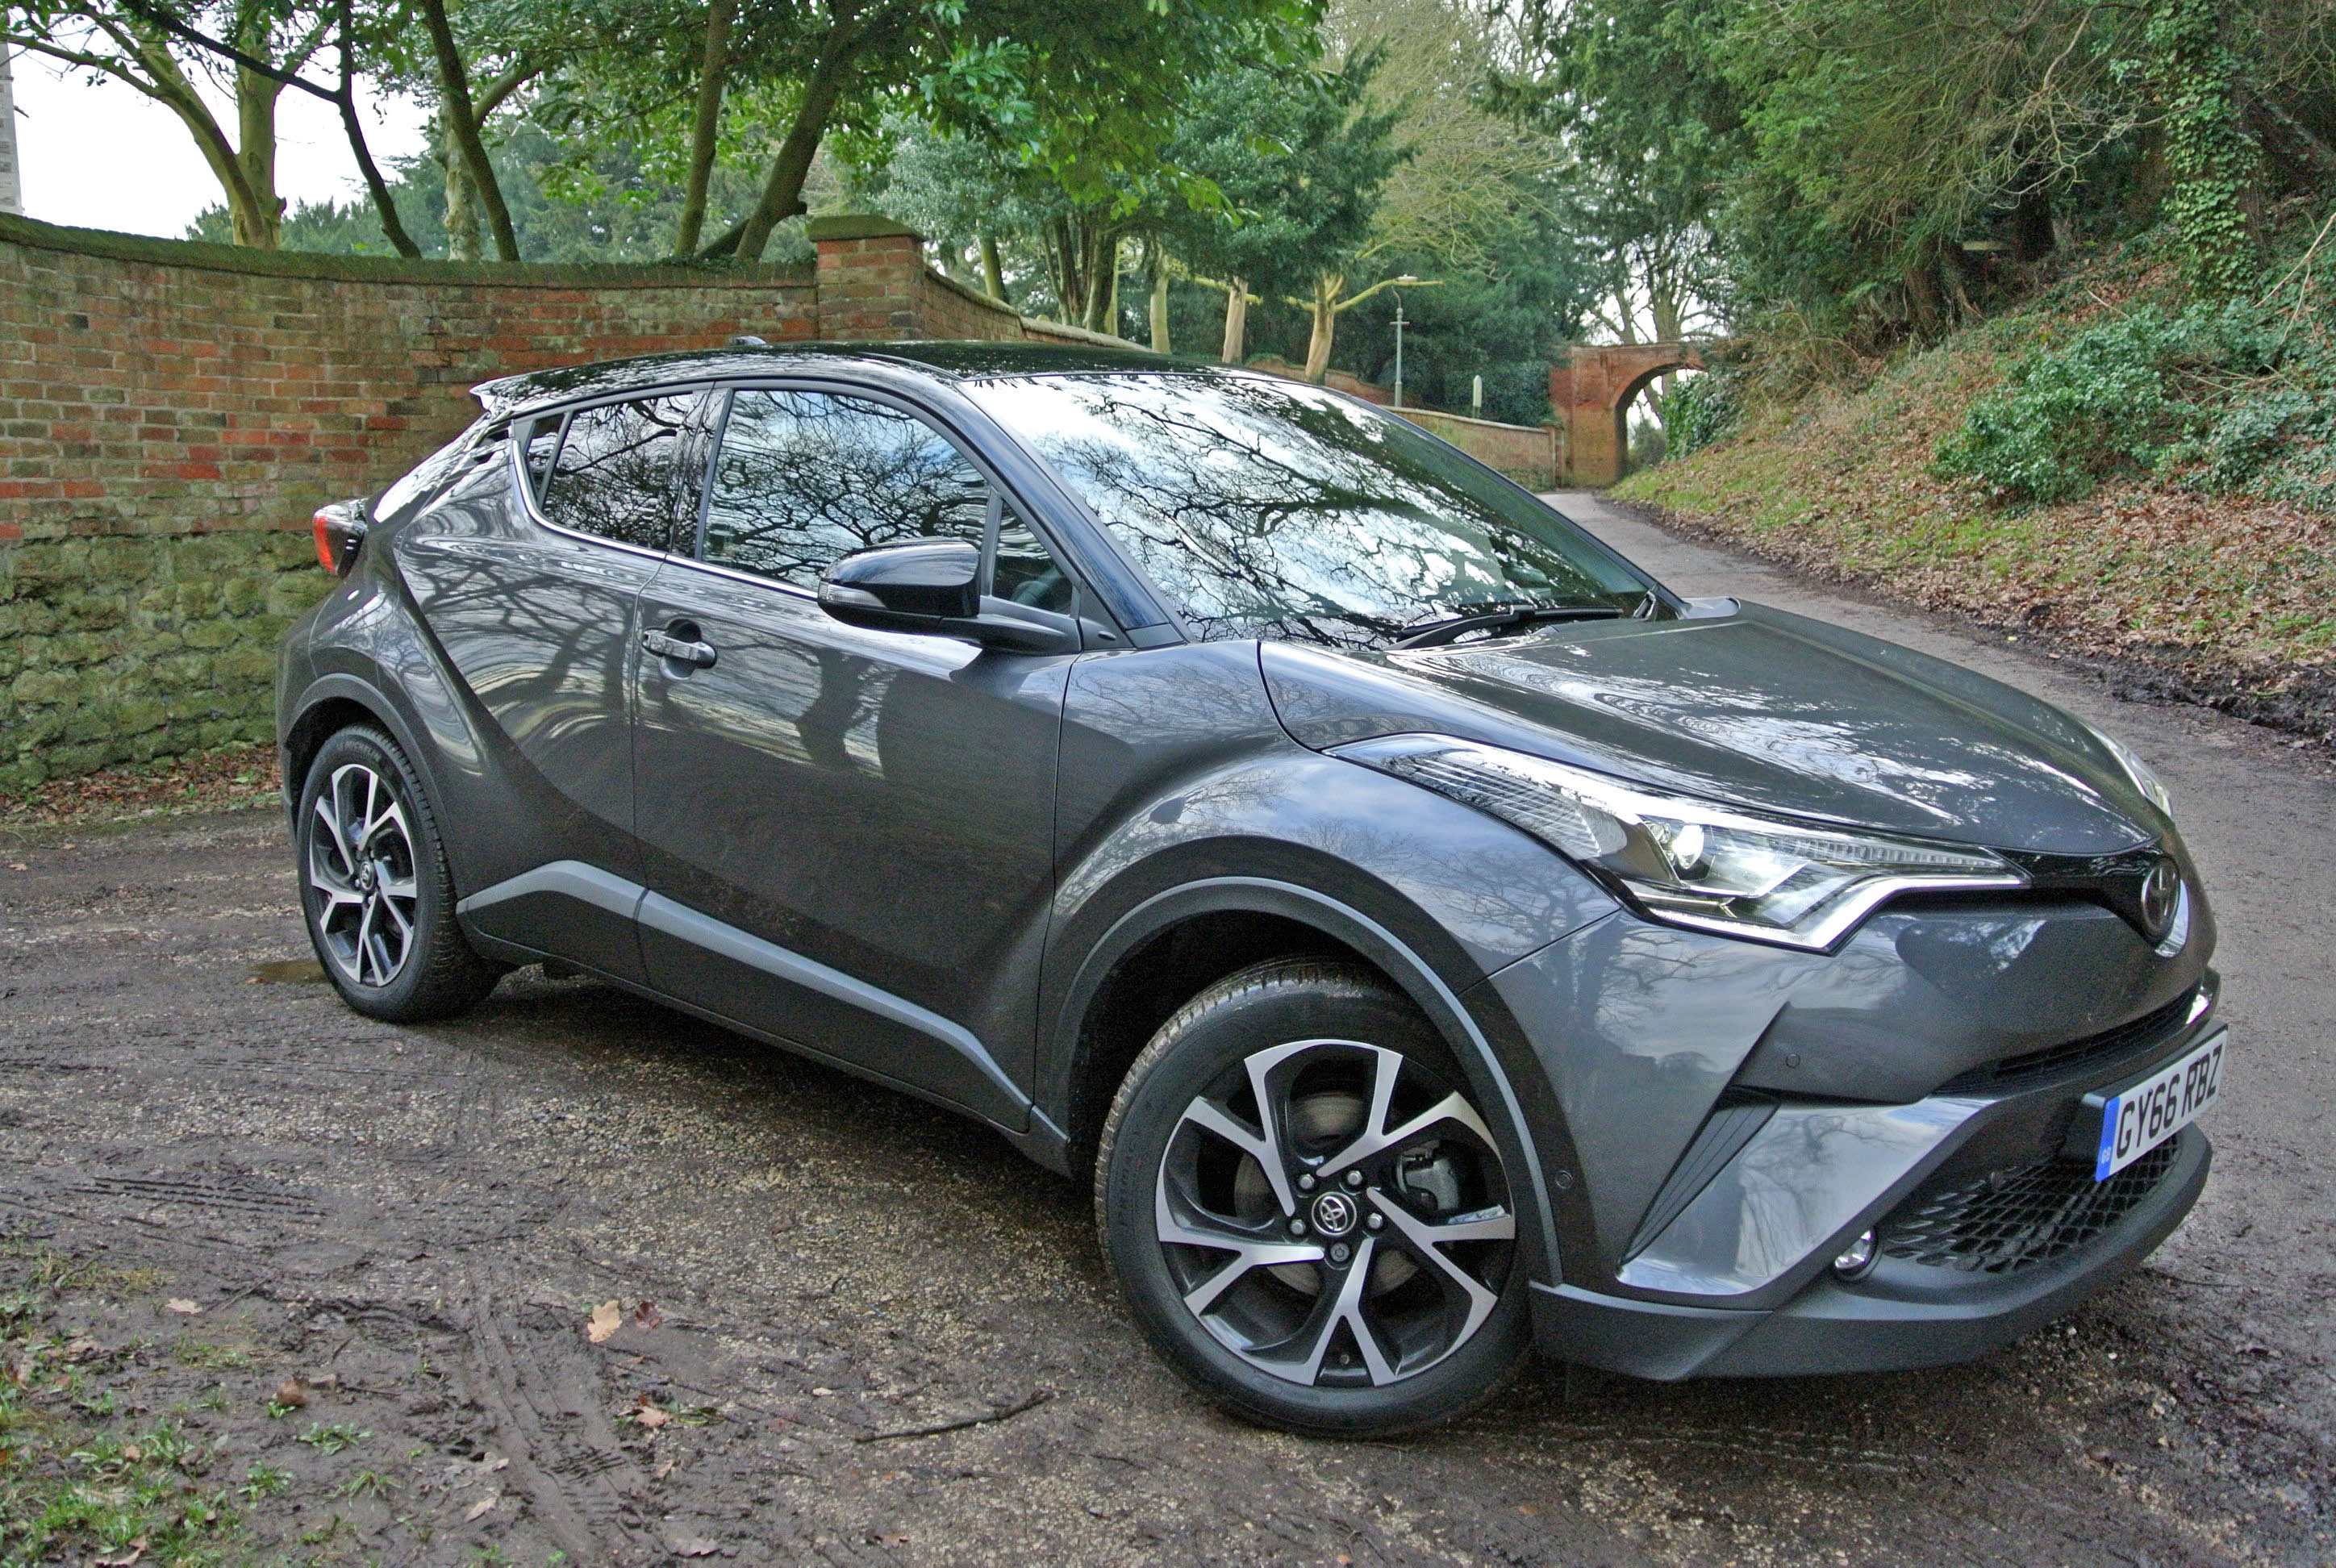 Latest Toyota C-HR could be aimed at people of a certain age